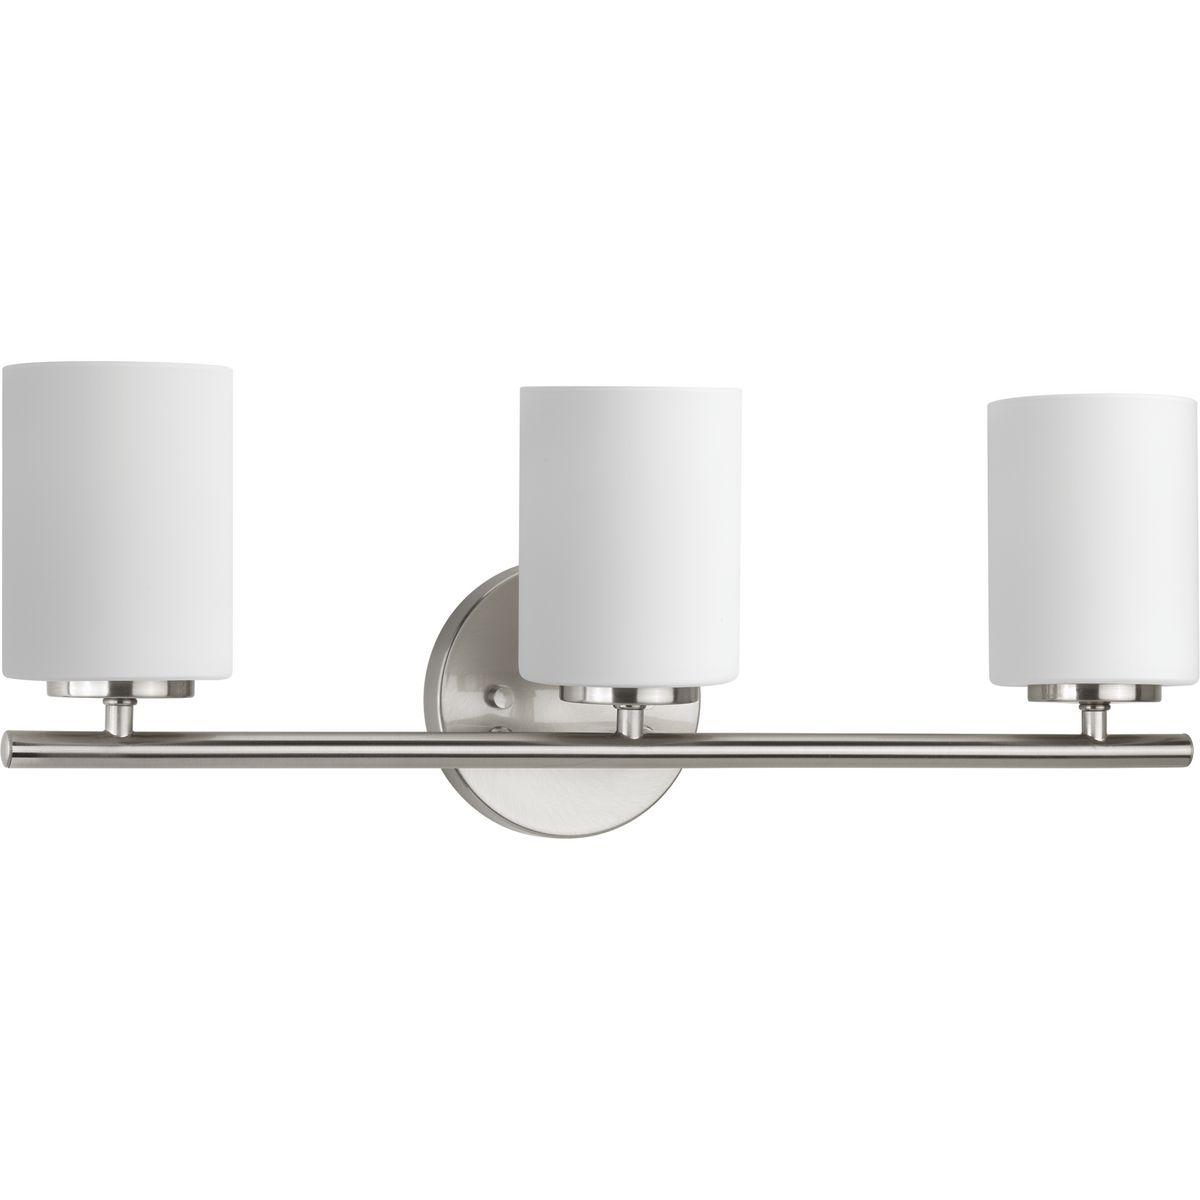 Hubbell P2159-09 Three-light bath & vanity from the Replay Collection, smooth forms, linear details and a pleasingly elegant frame enhance a simplified modern look. Fixture can be mounted up or down. Brushed Nickel finish.  ; Ideal for a bathroom ; Perfect for modern and 